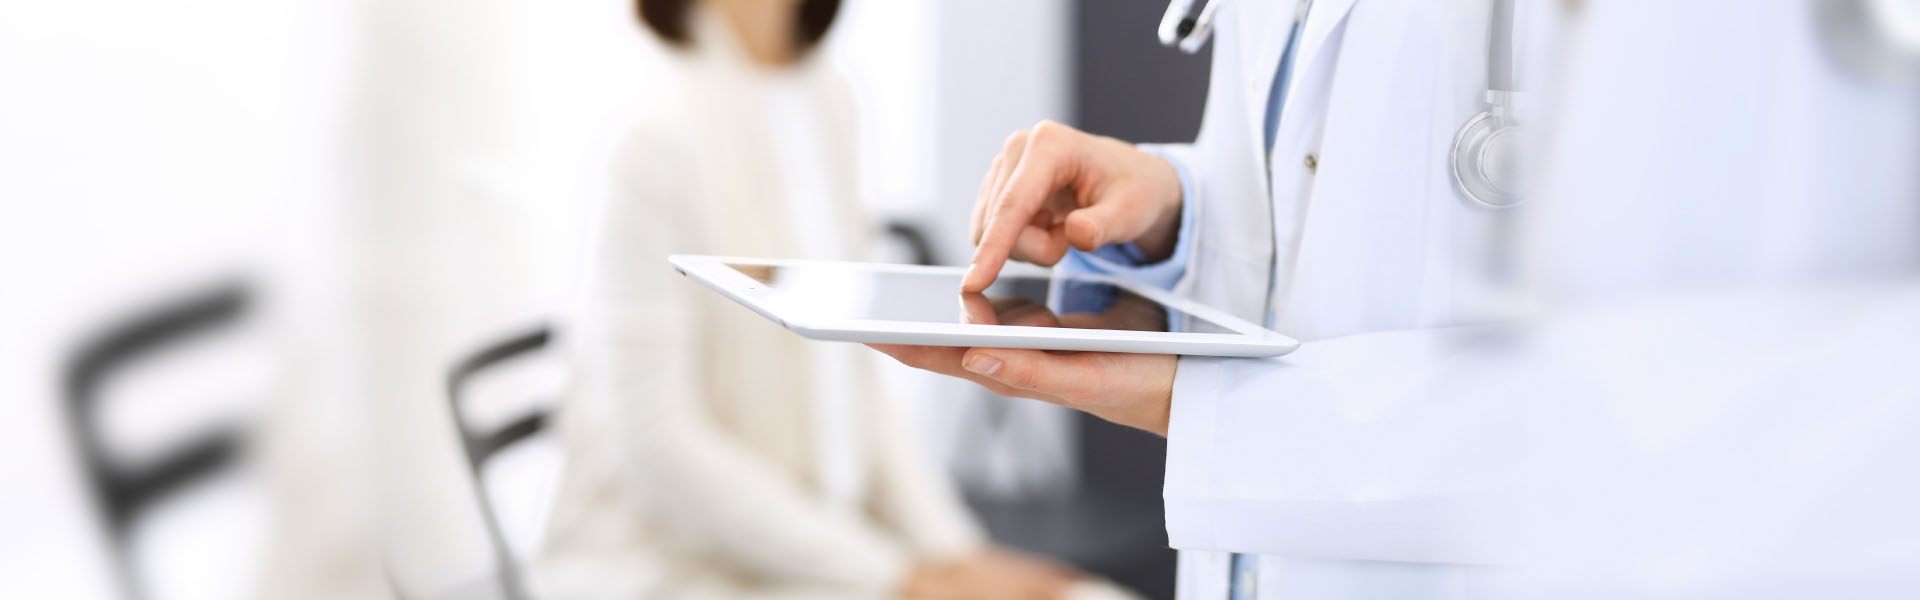 The modern healthcare industry needs cutting edge technology solutions like DrySign e-signatures